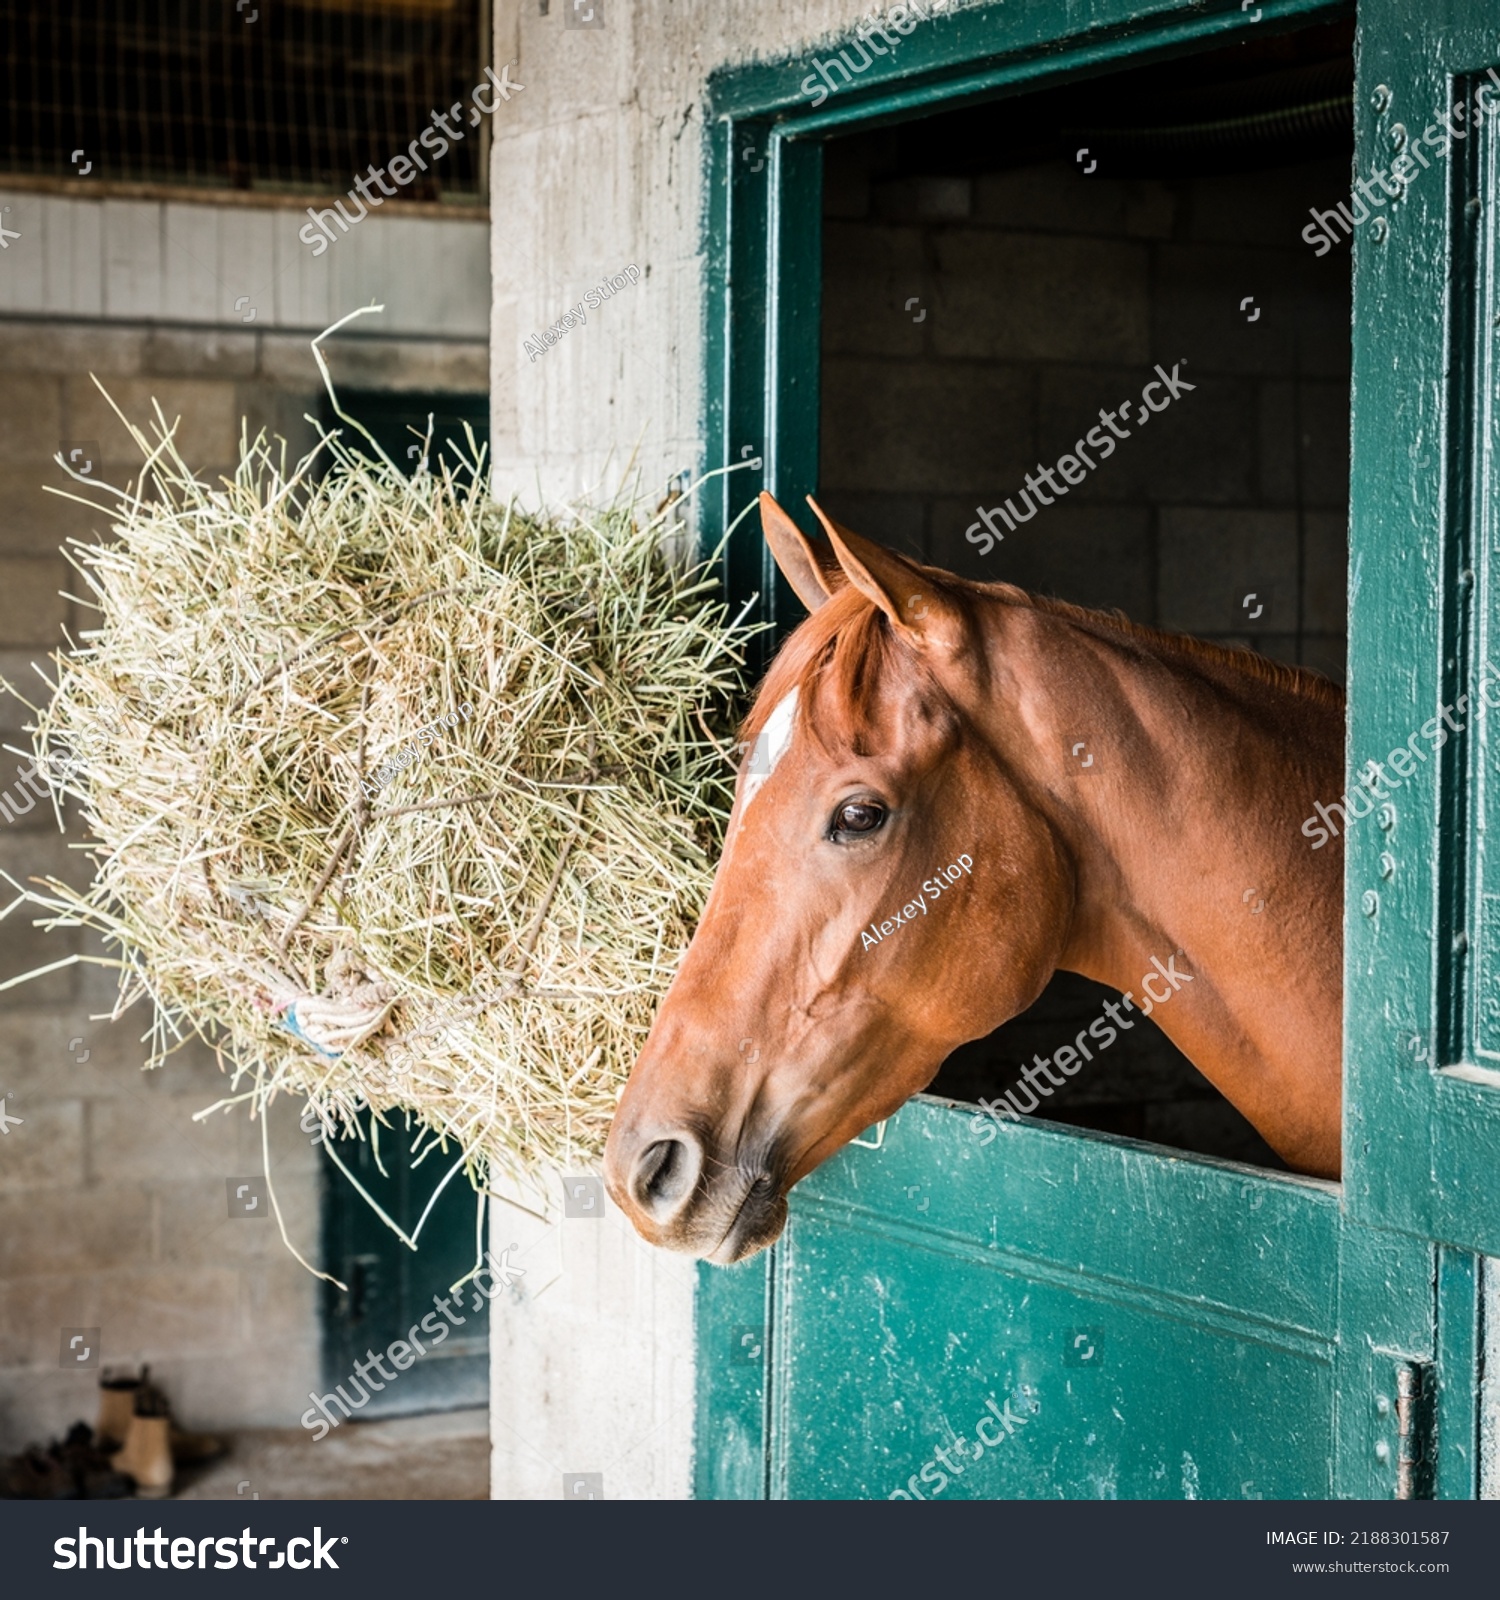 Thoroughbred race horse in a stable in Lexington, Kentucky #2188301587